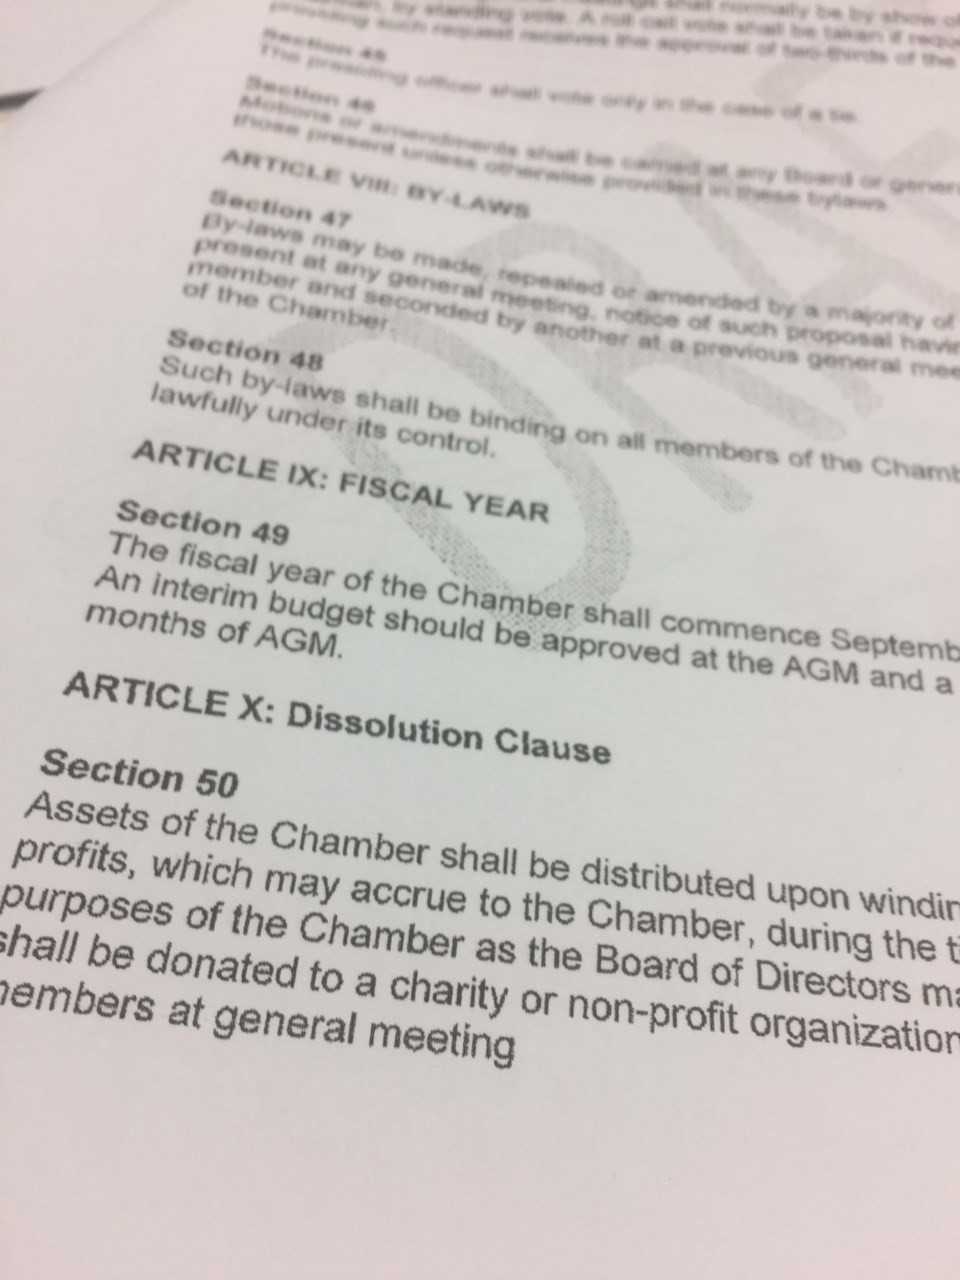  Article 10, Section 50 was a hot topic of the Chamber's bylaws at Monday night's AGM. It outlines how to dissolve the organization.